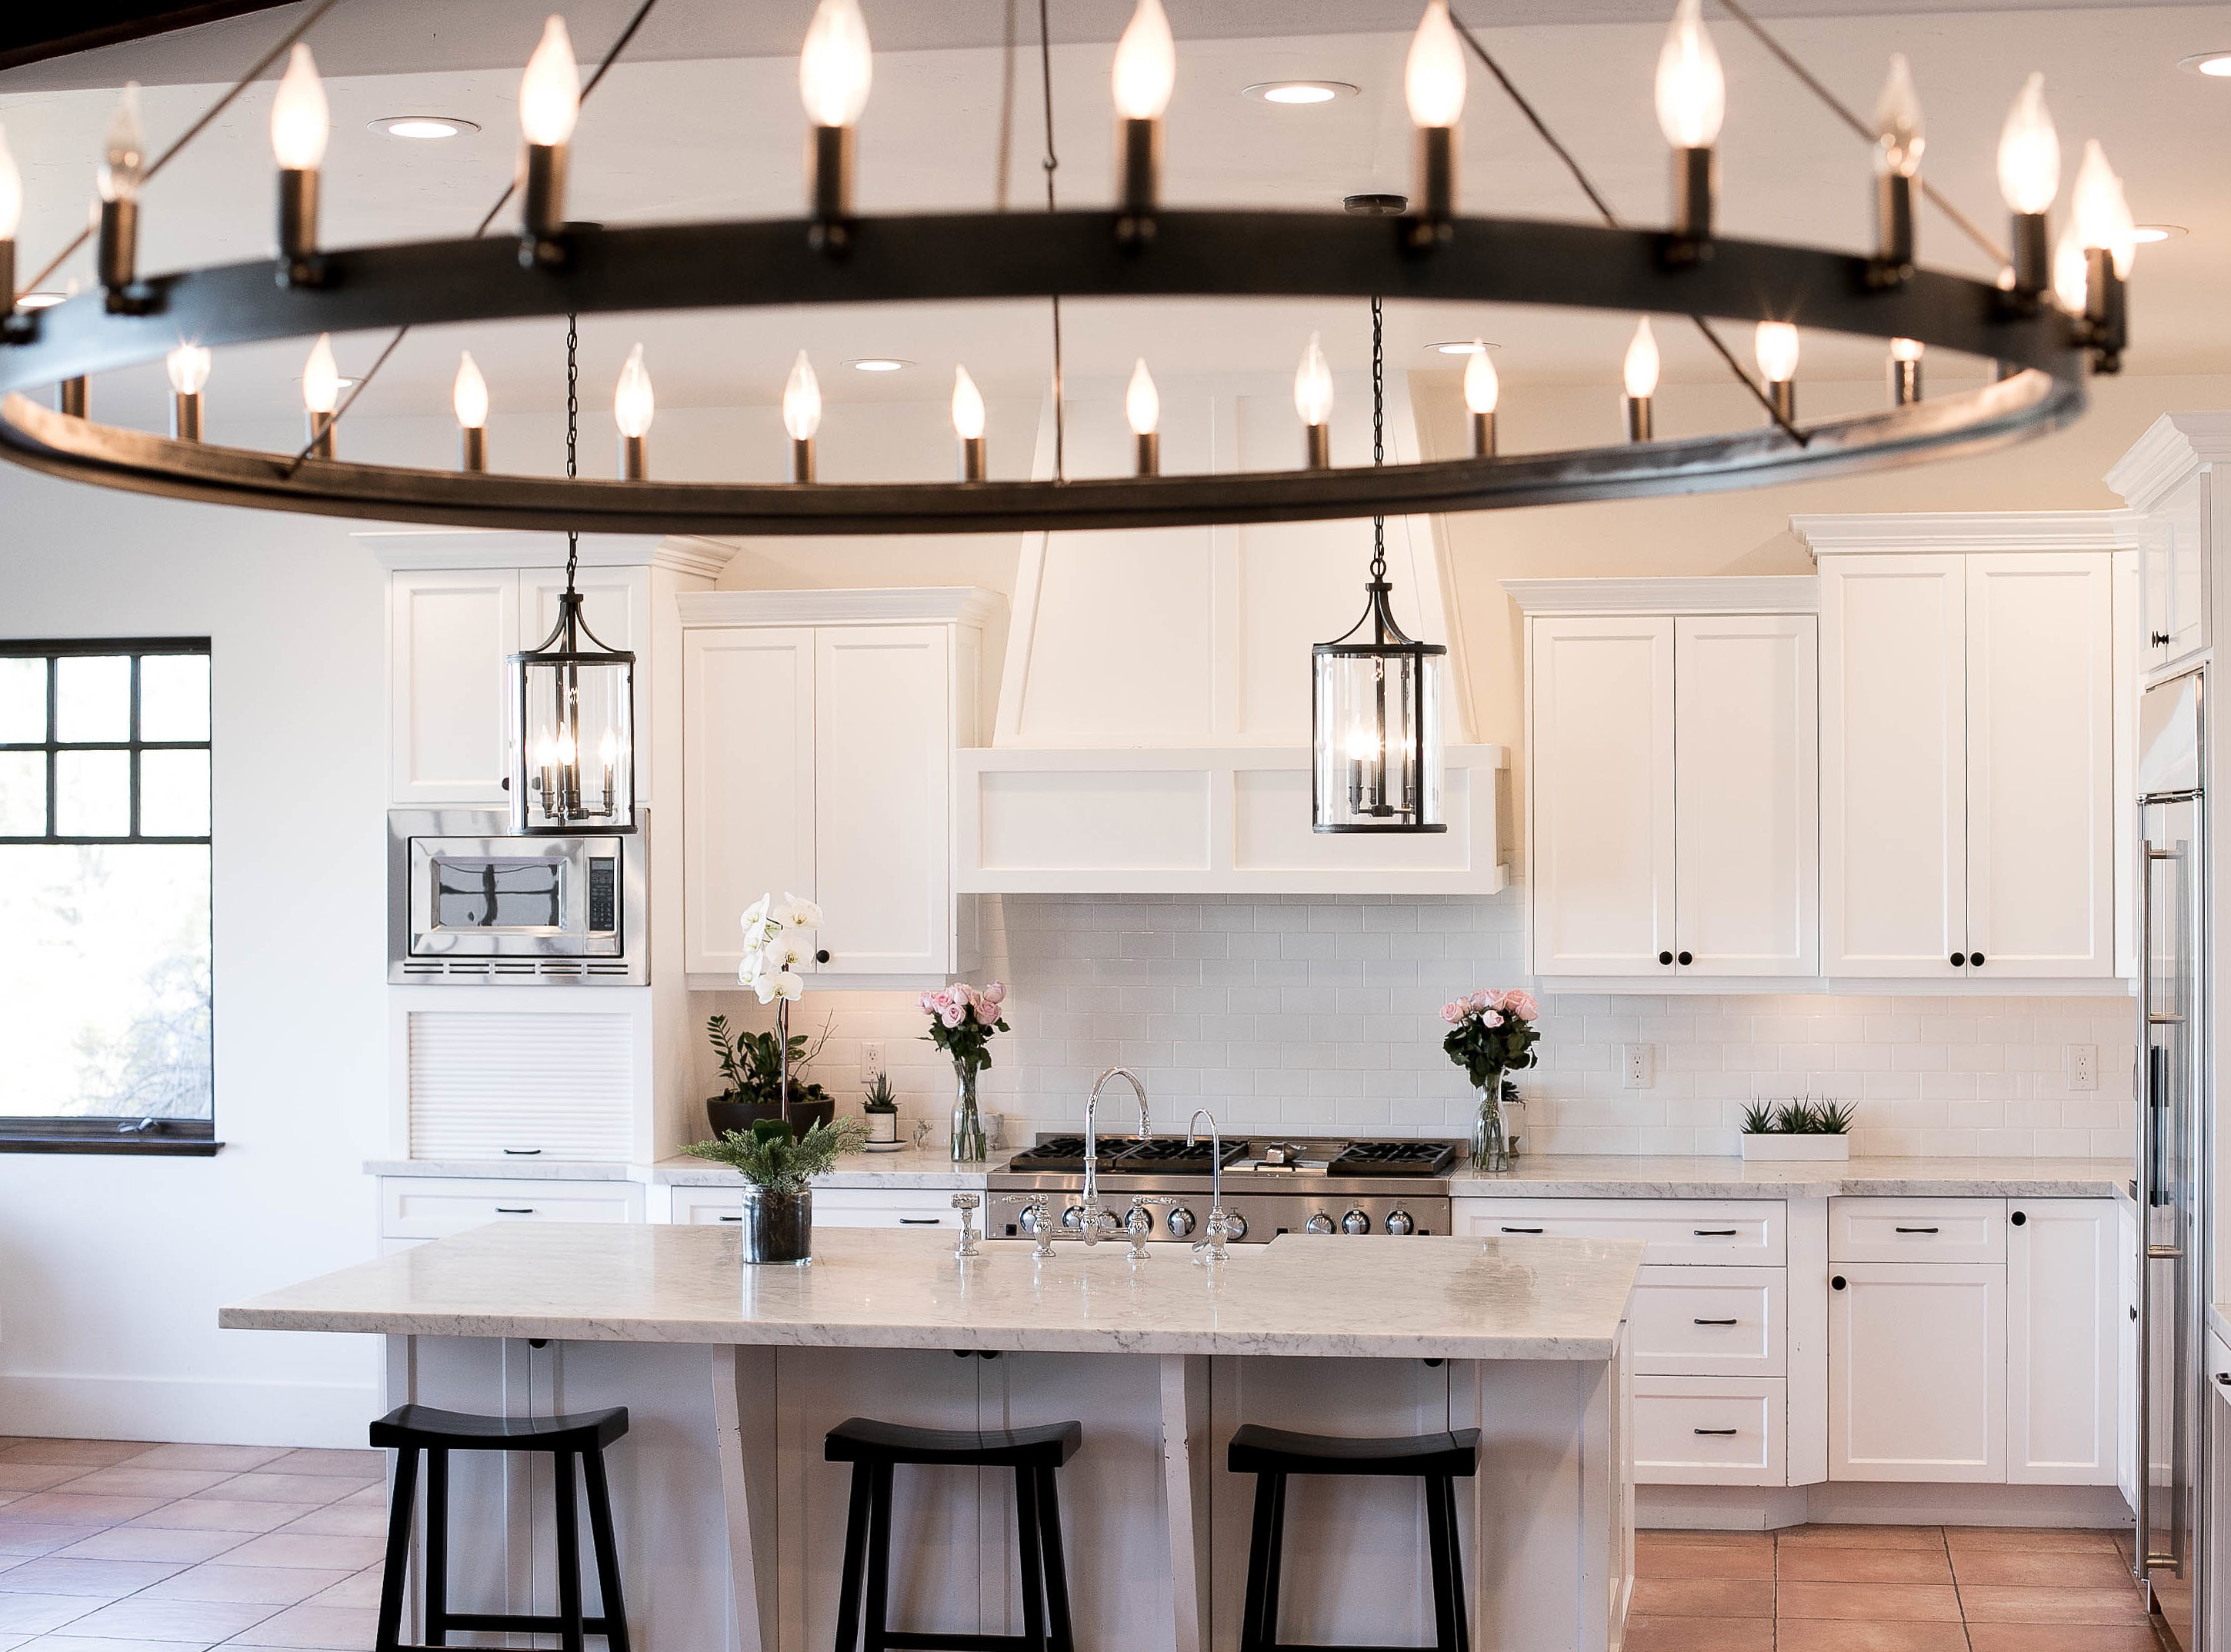 Reno, Nevada blogger, Emily Farren Wieczorek shares the details on her home makeover and why she chose this route instead of renovating.